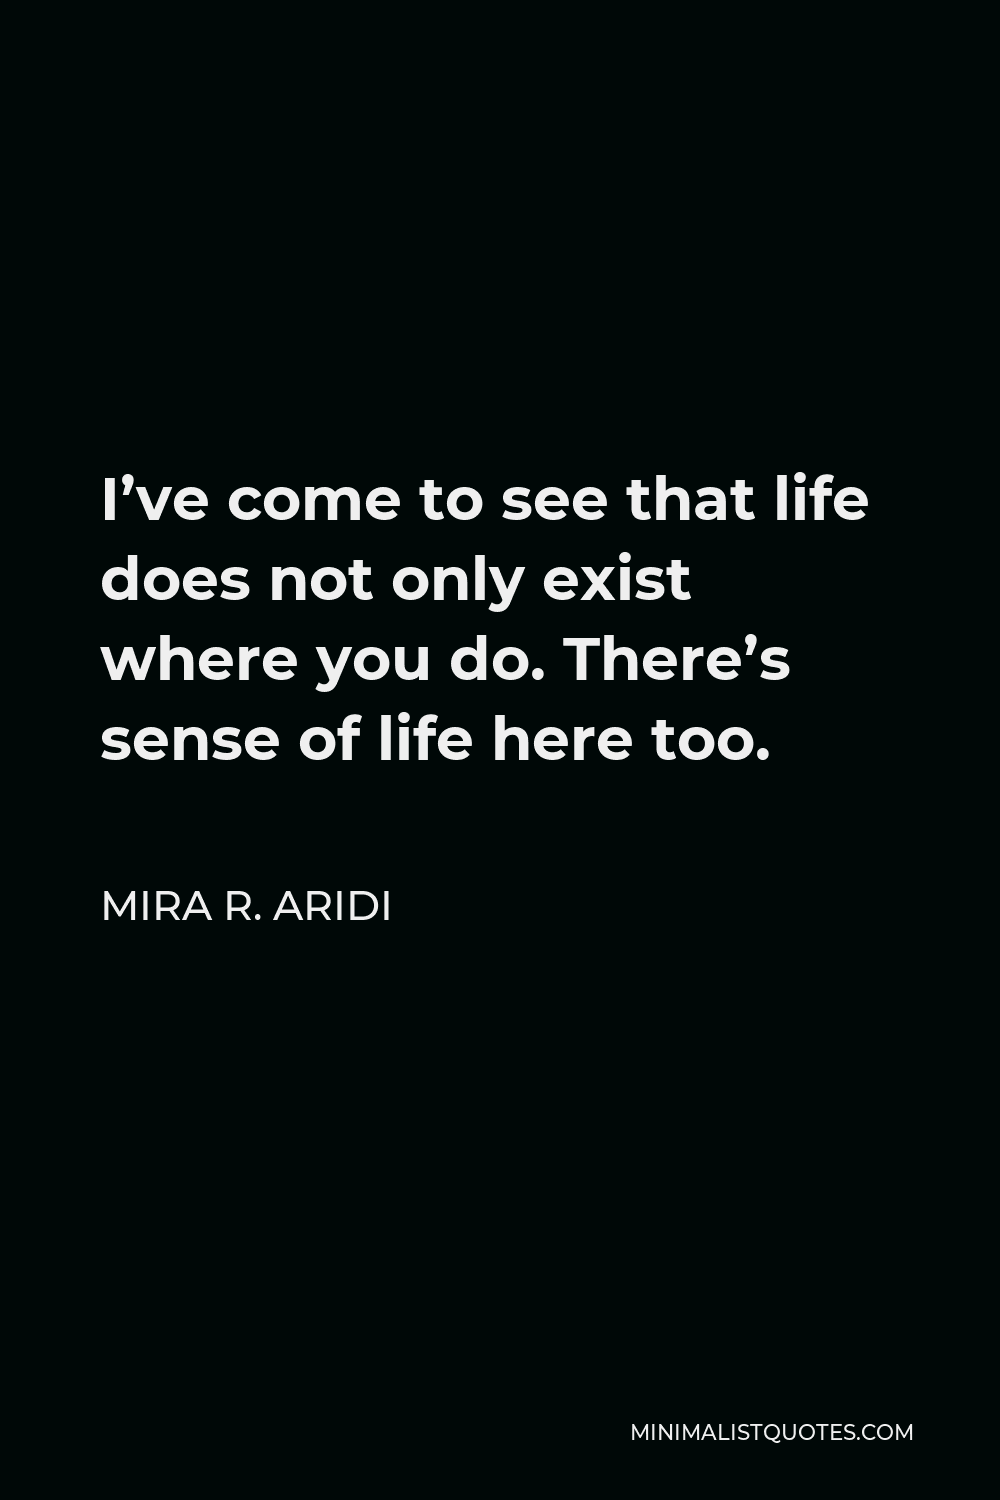 Mira R. Aridi Quote - I’ve come to see that life does not only exist where you do. There’s sense of life here too.